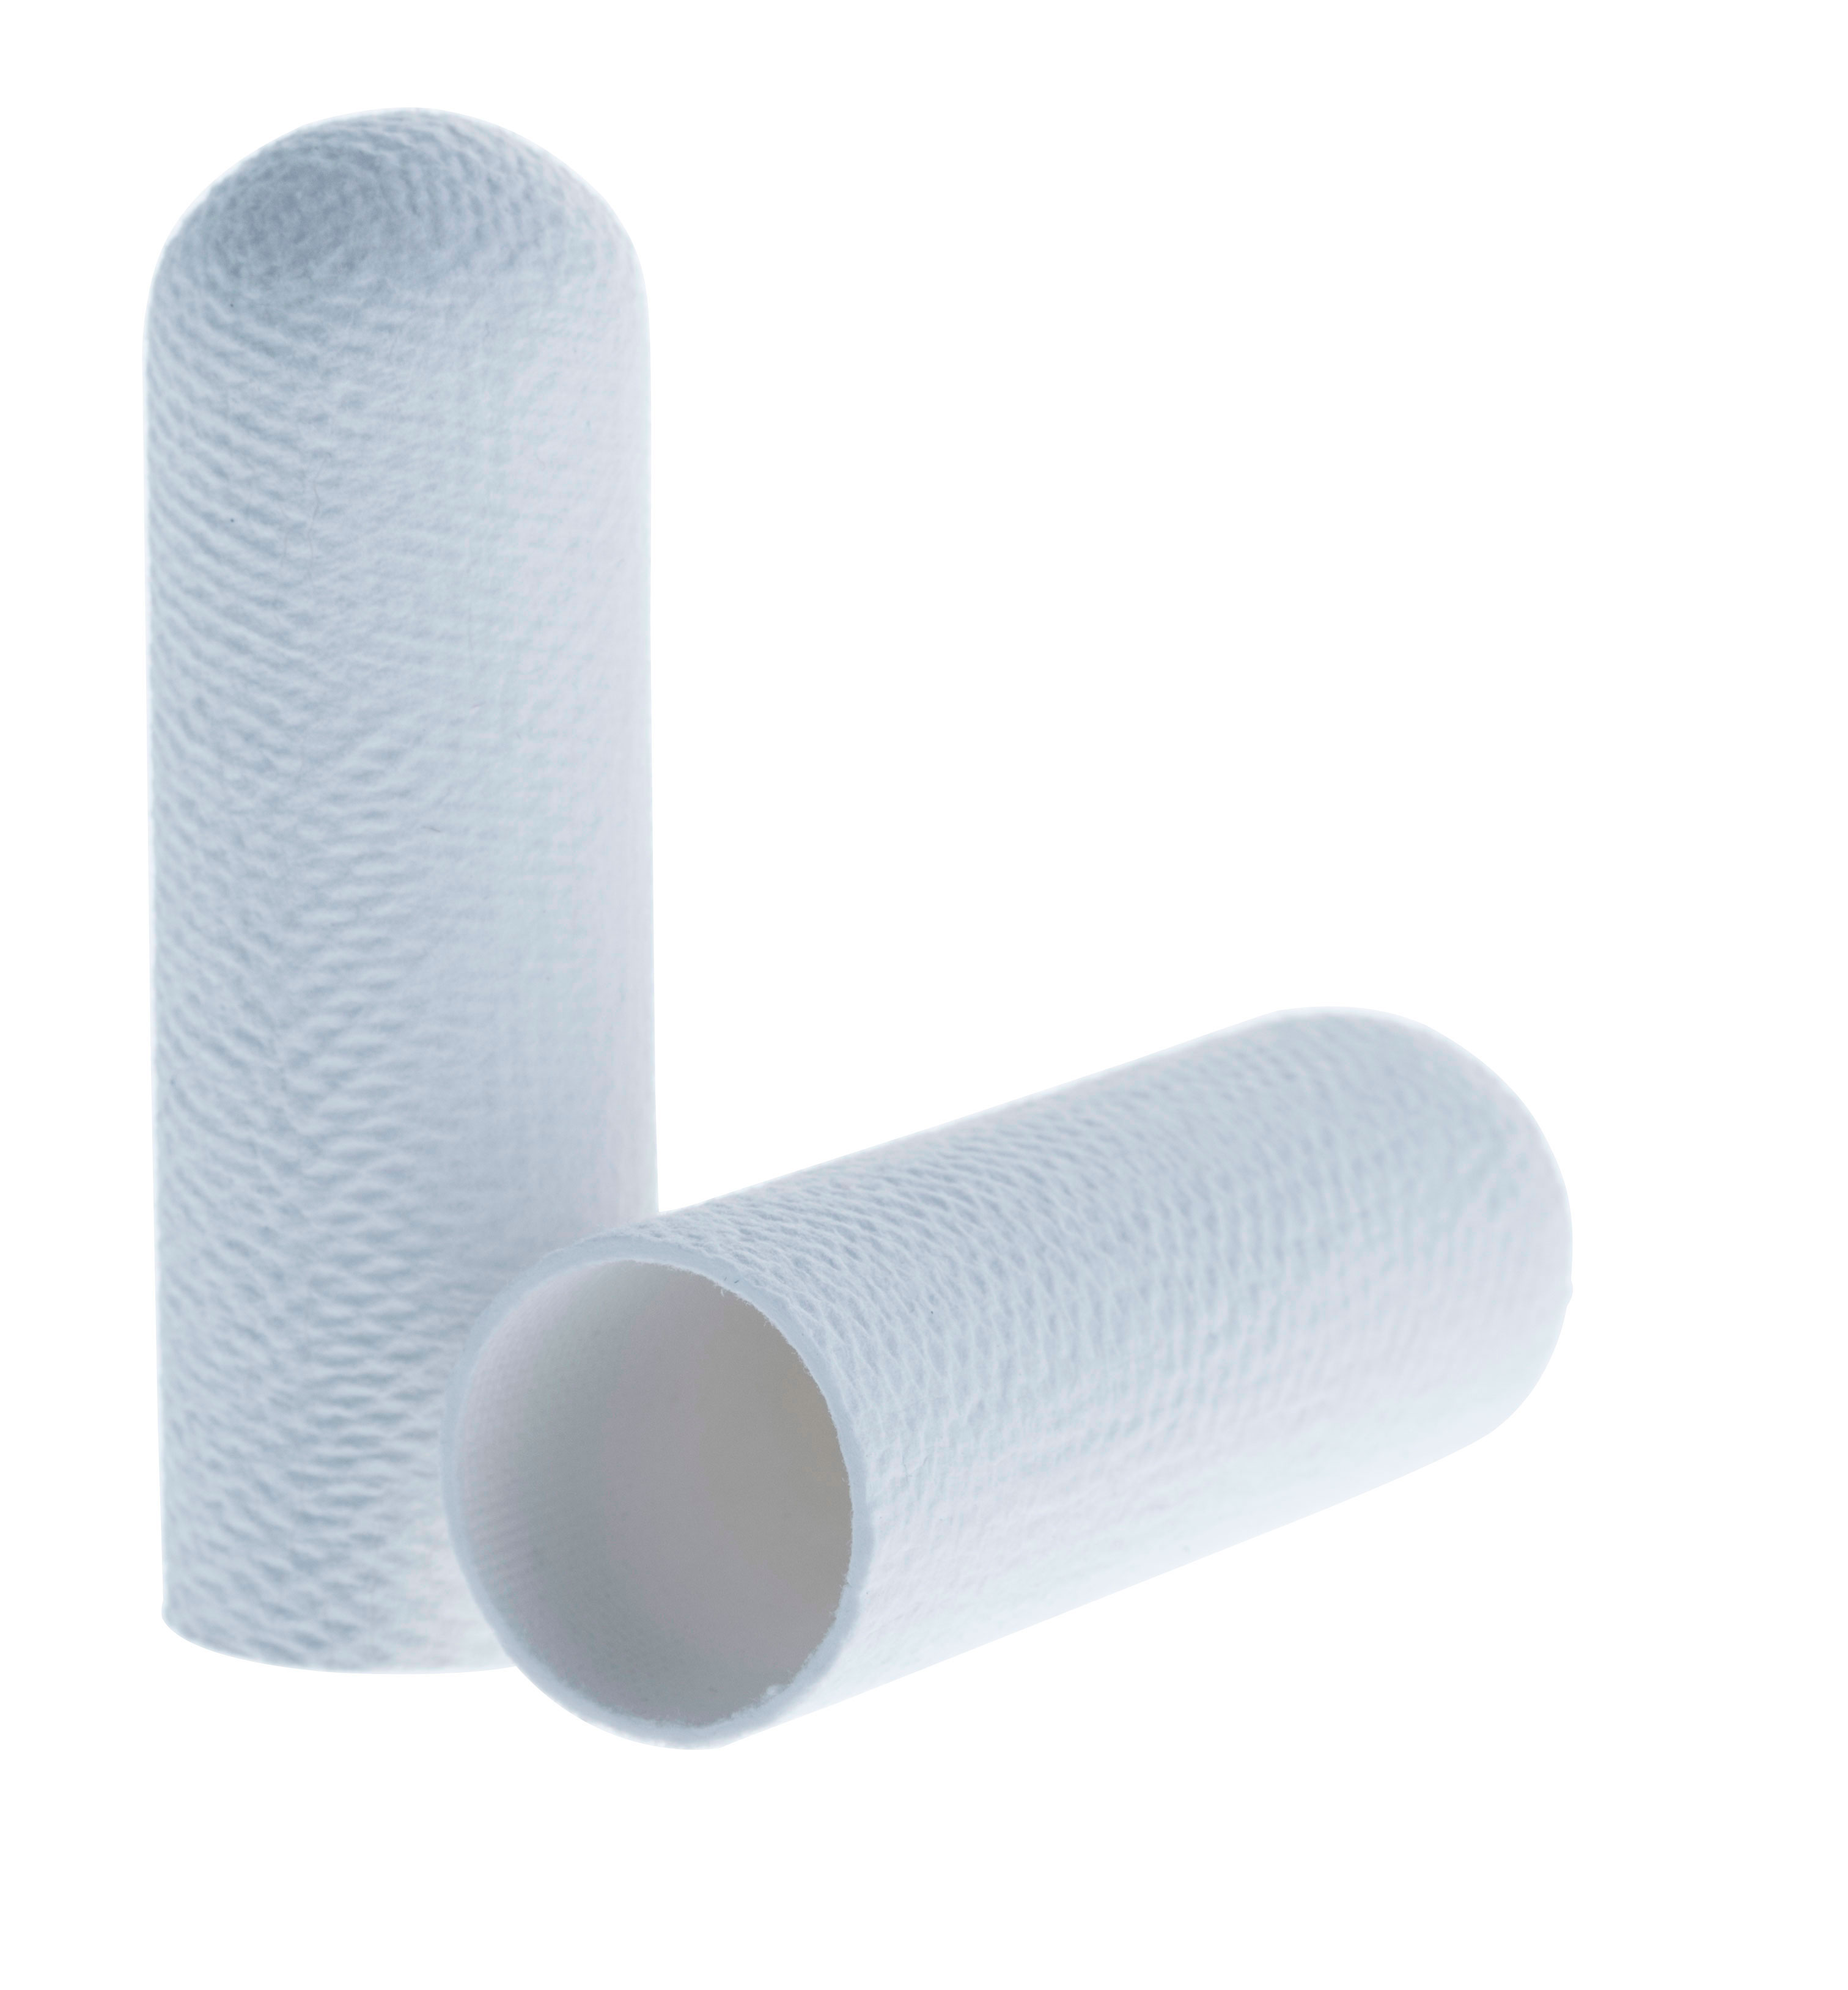 Cellulose extraction thimbles for Soxhlet extraction. SCHARLAU. Standard cellulose cartridge. Dim. Øxlength: 30x80mm. Particle retention in liquid: Nom. 8-15 microns